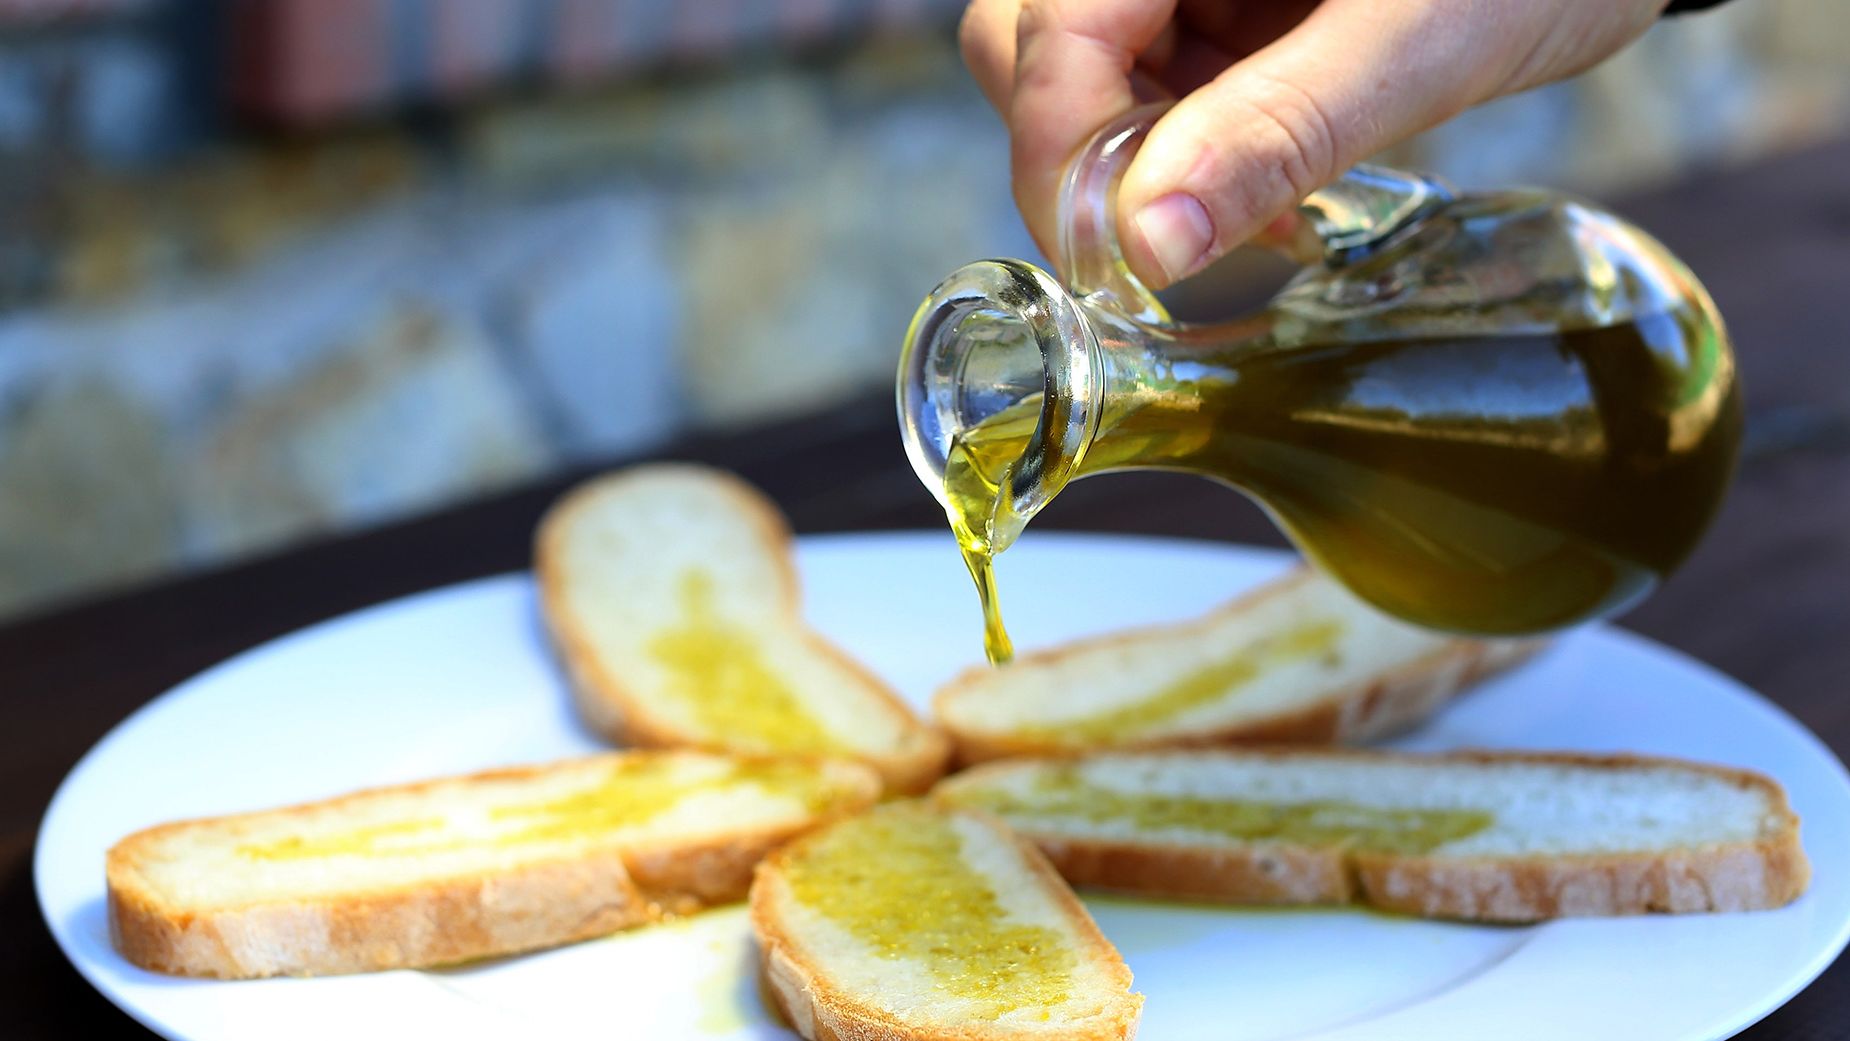 Olive oil exports are worth billions of dollars.